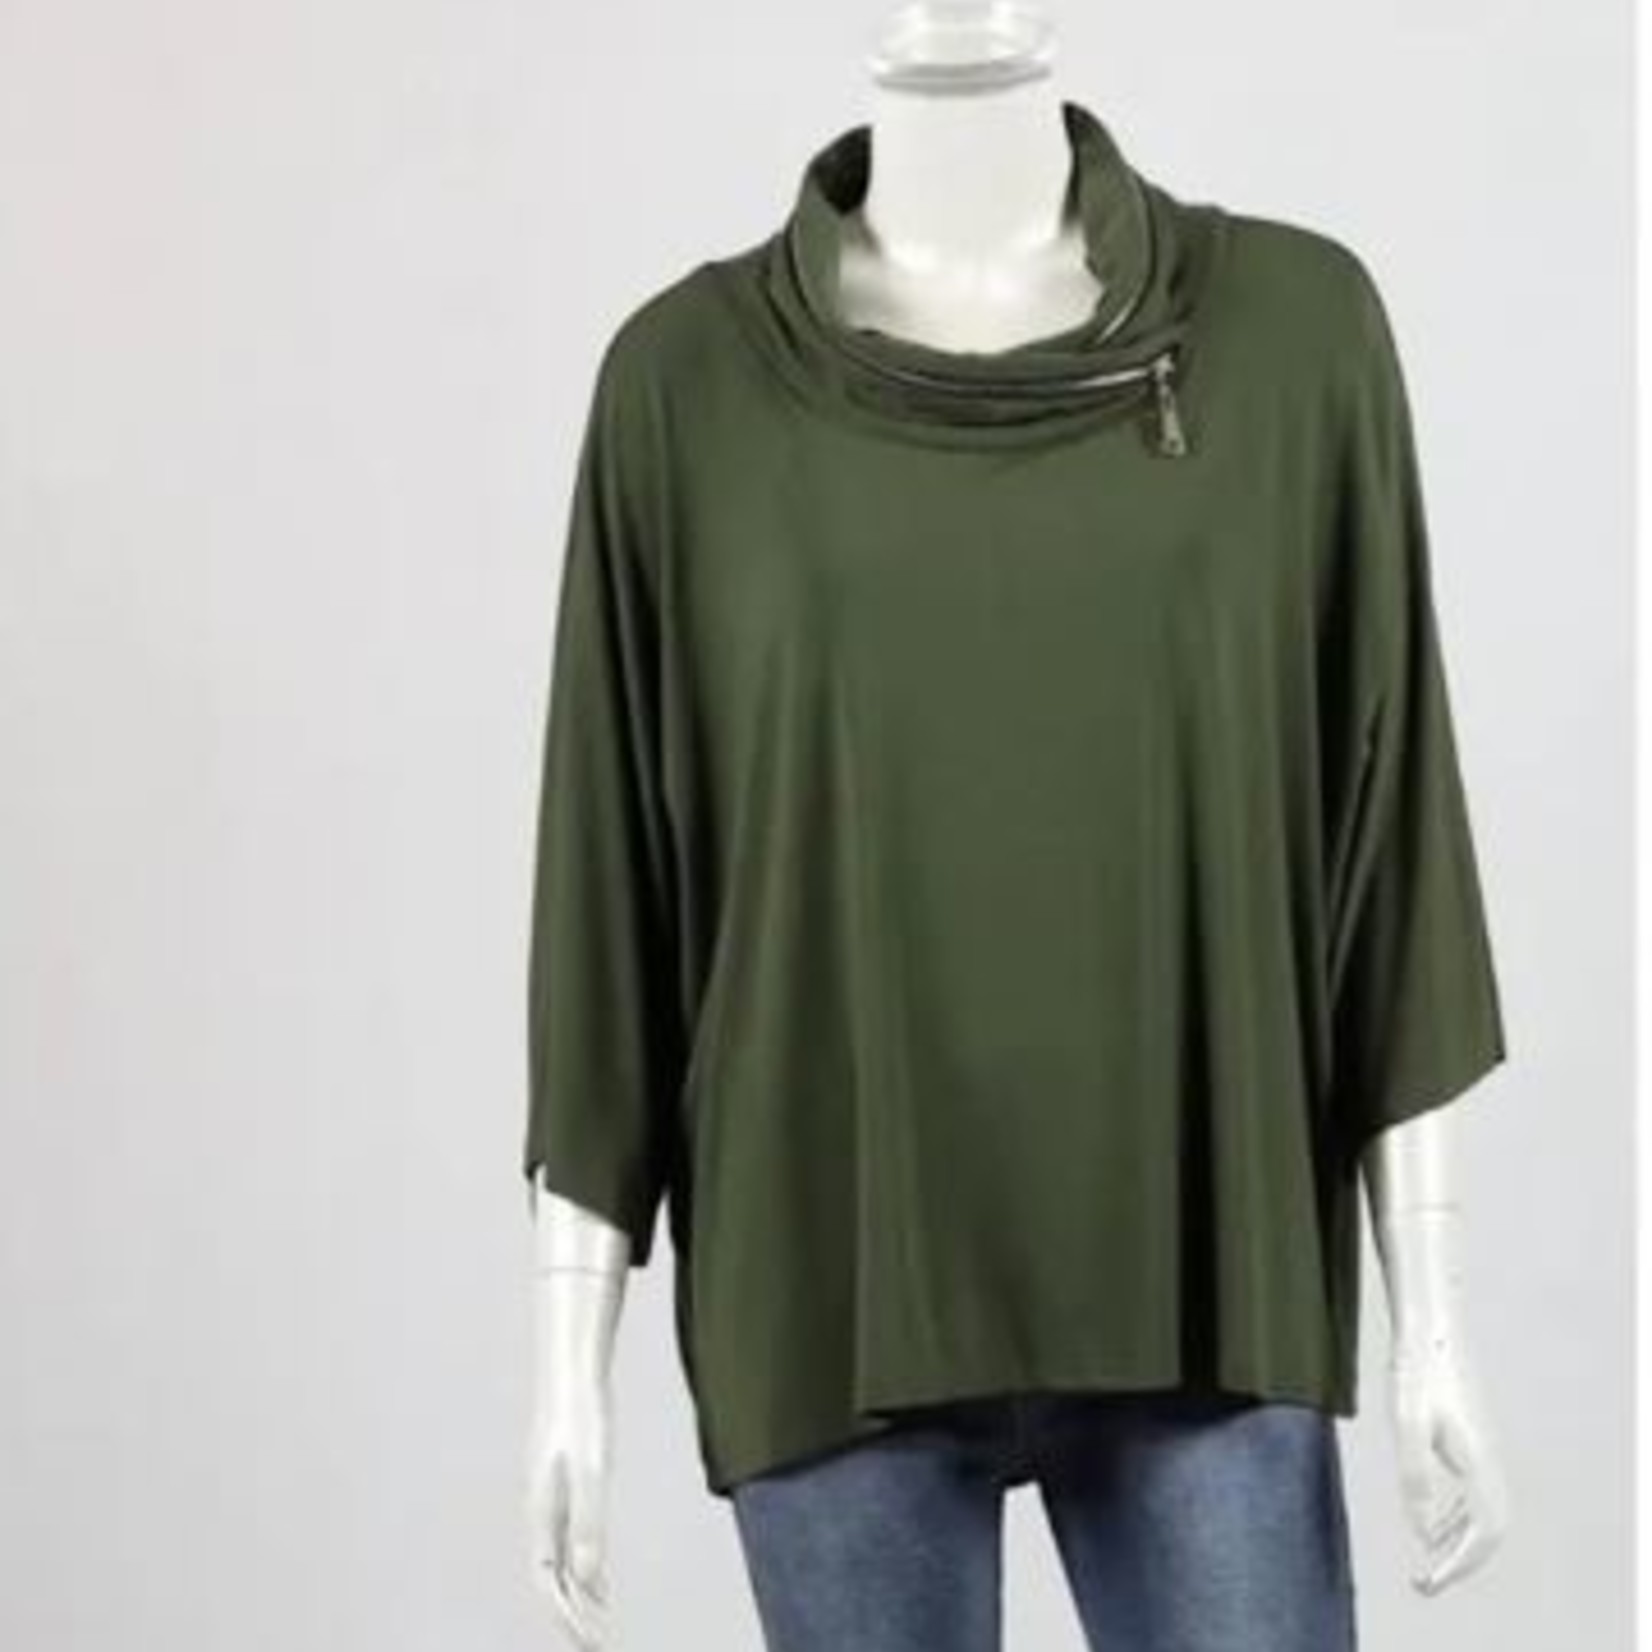 Bamboo By Whispers 1/2 Batwing Sleeve Zip Top